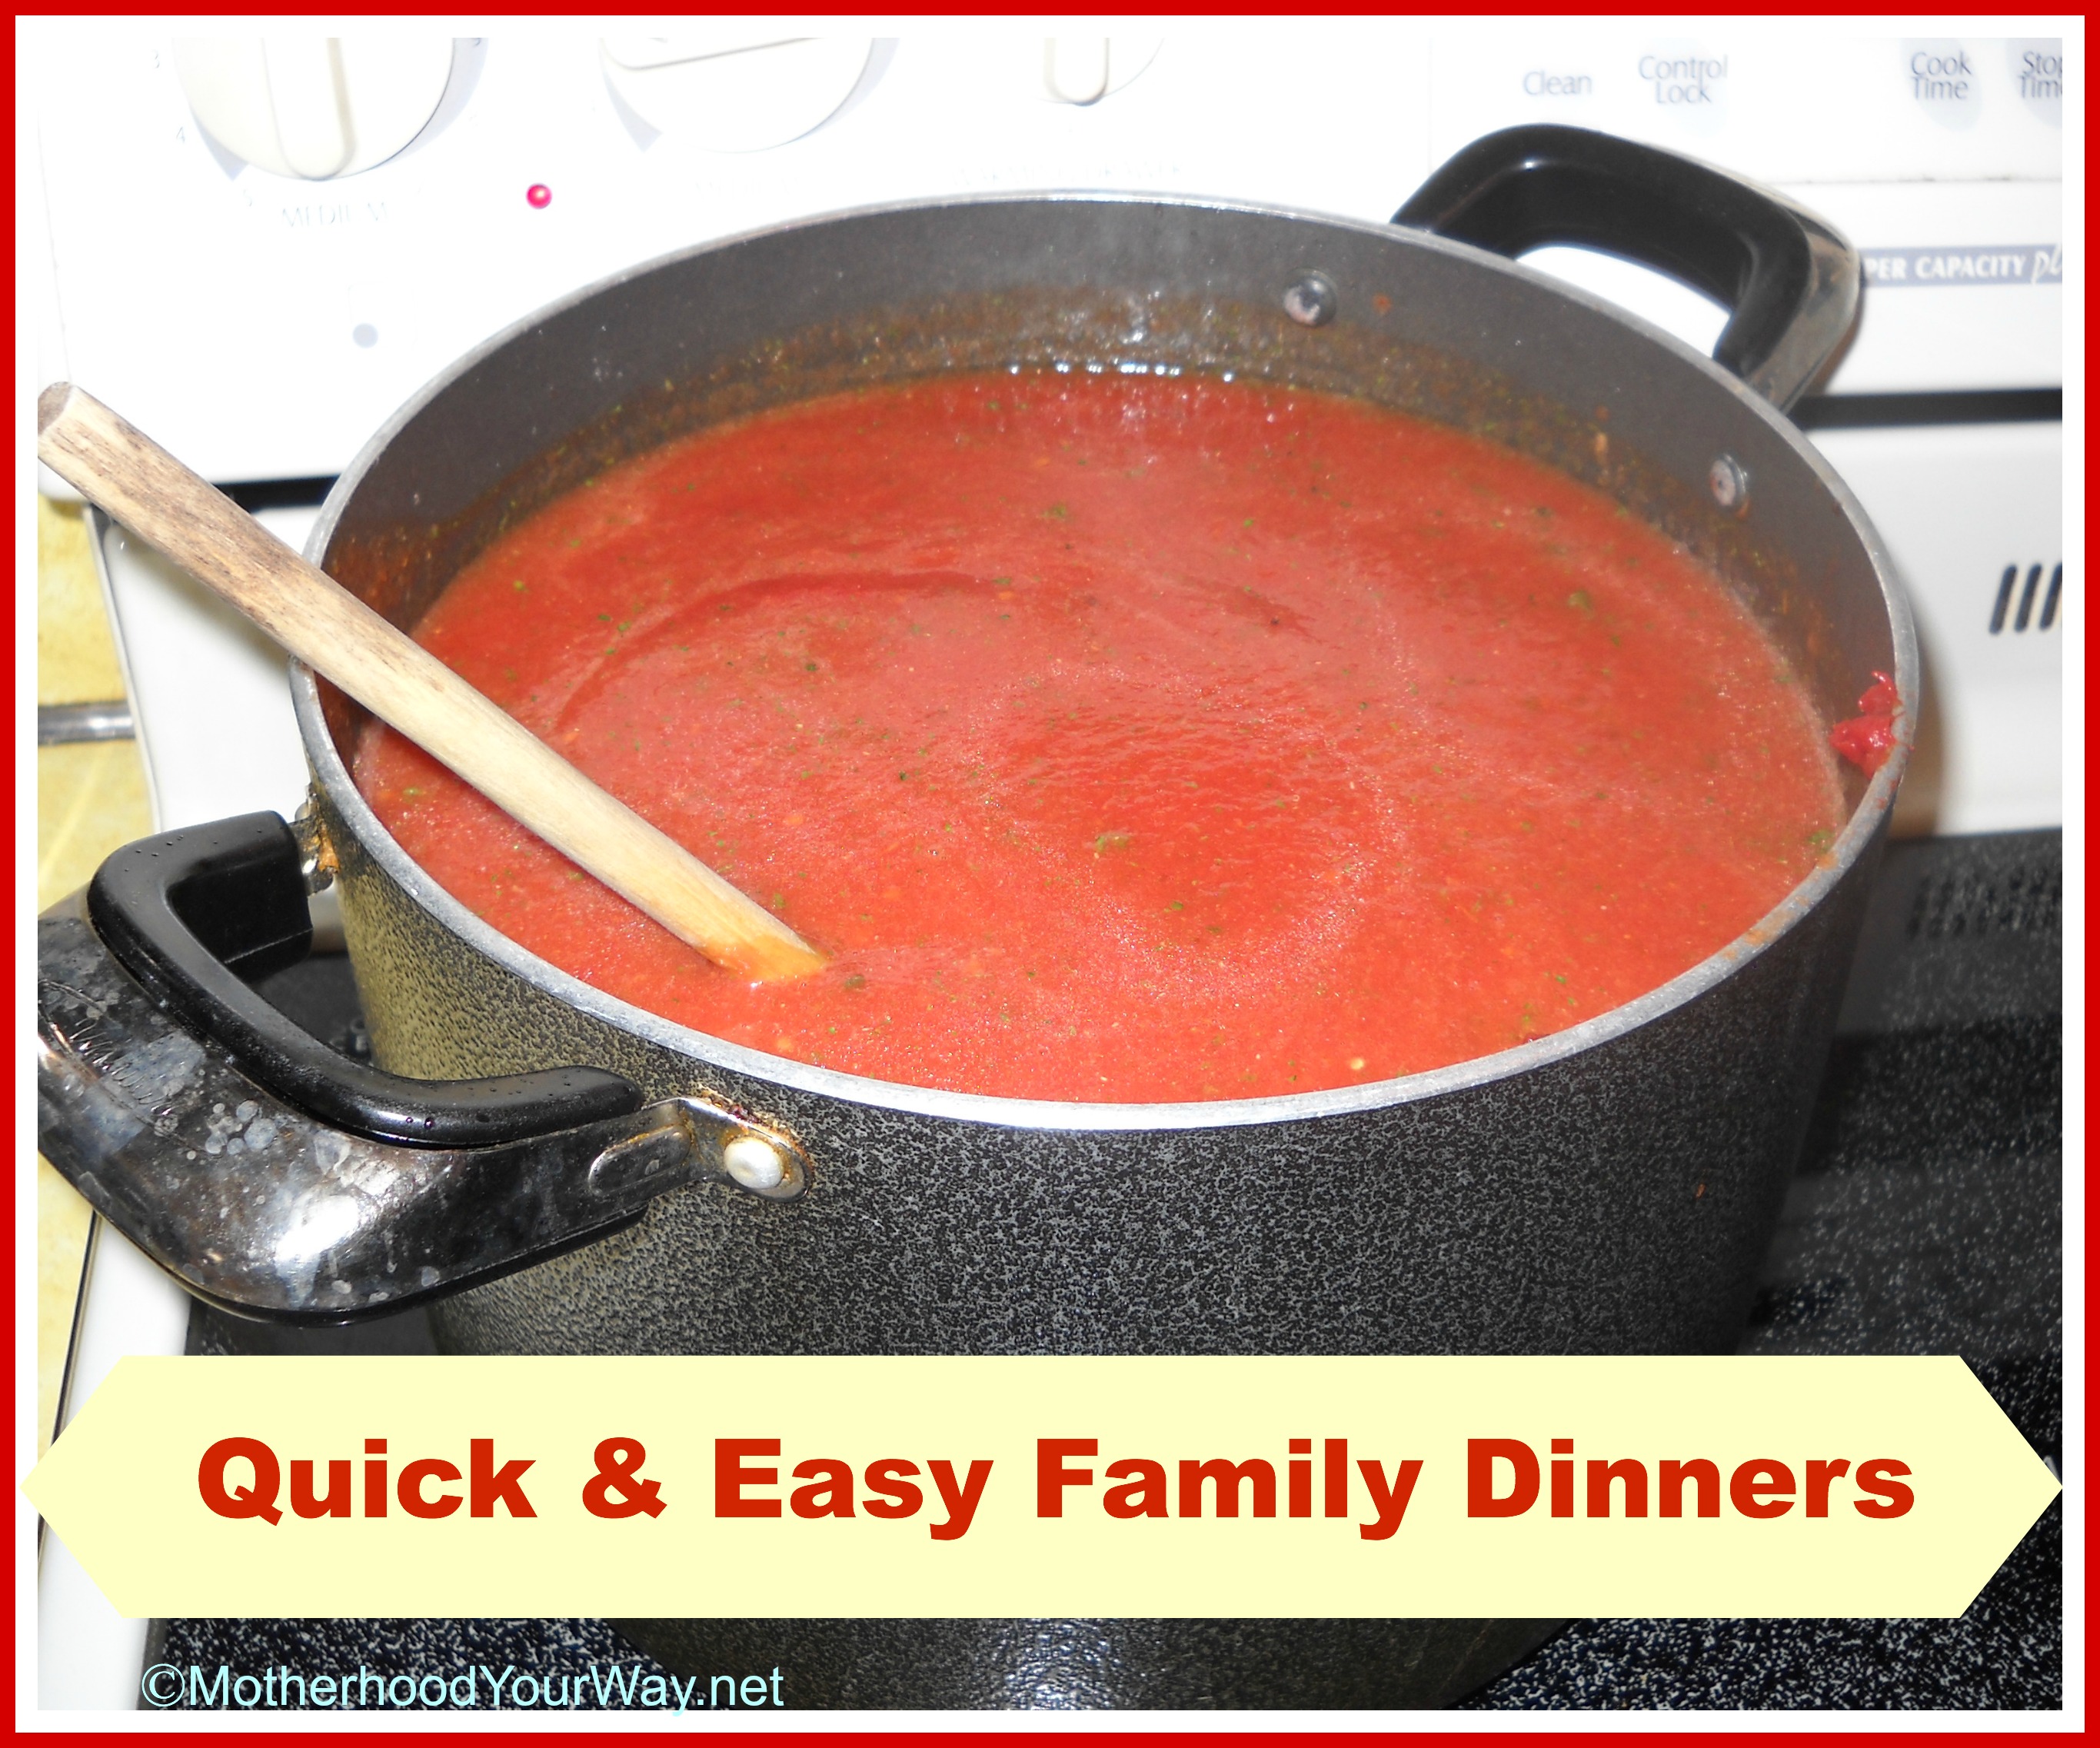 Quick and Easy Family Dinners